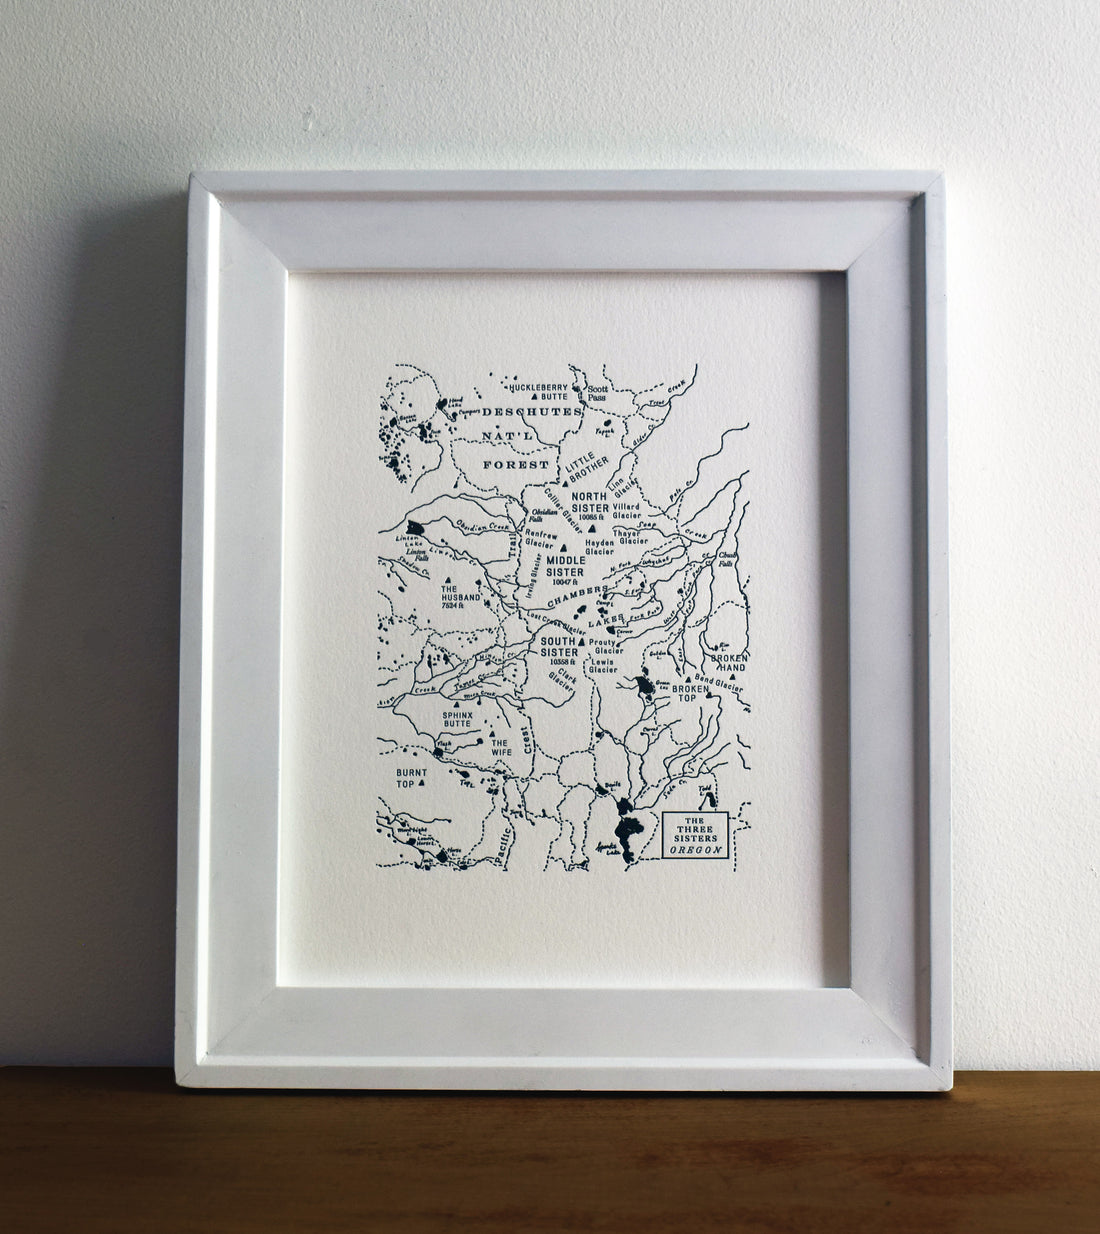 Framed wall art map.  Hand drawn letterpress printed map of the three sisters wilderness and surrounding area.  Prominent mountains, trails, and watersheds are charted.